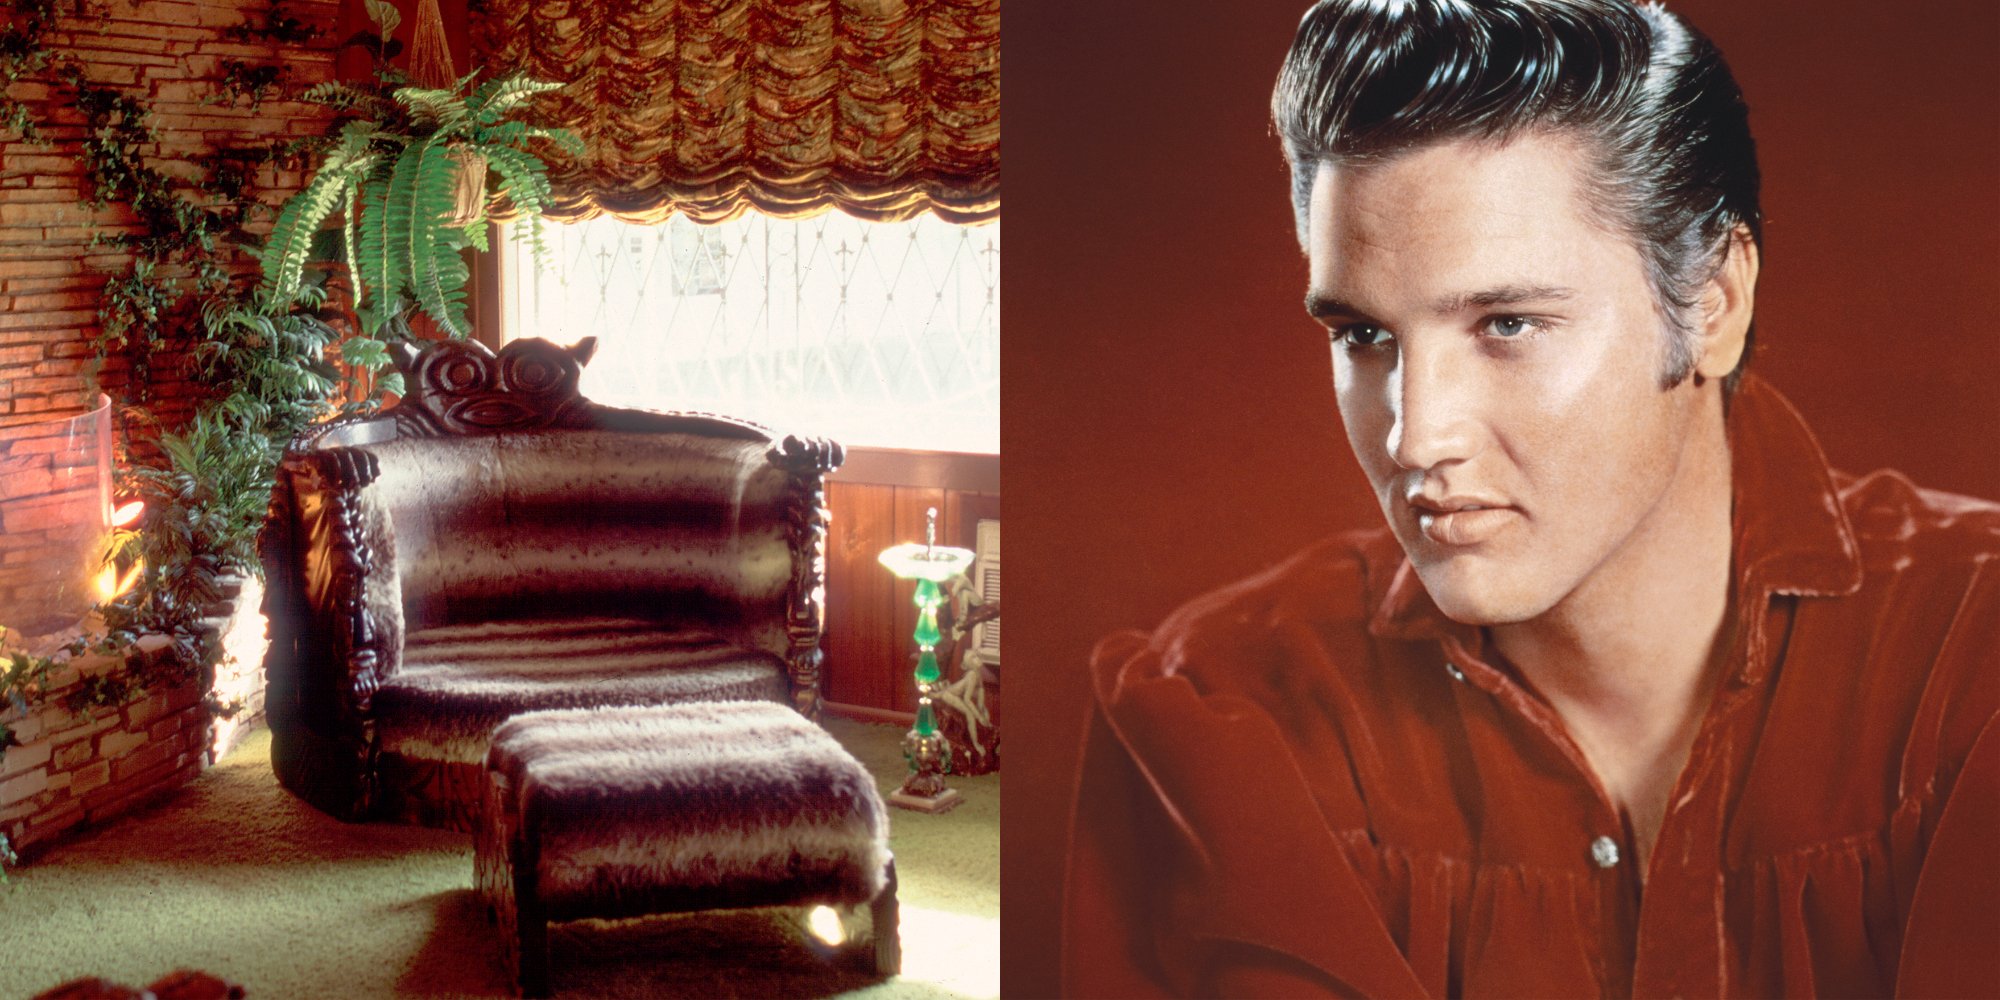 The Jungle Room in Graceland and a photo of Elvis Presley side by side.